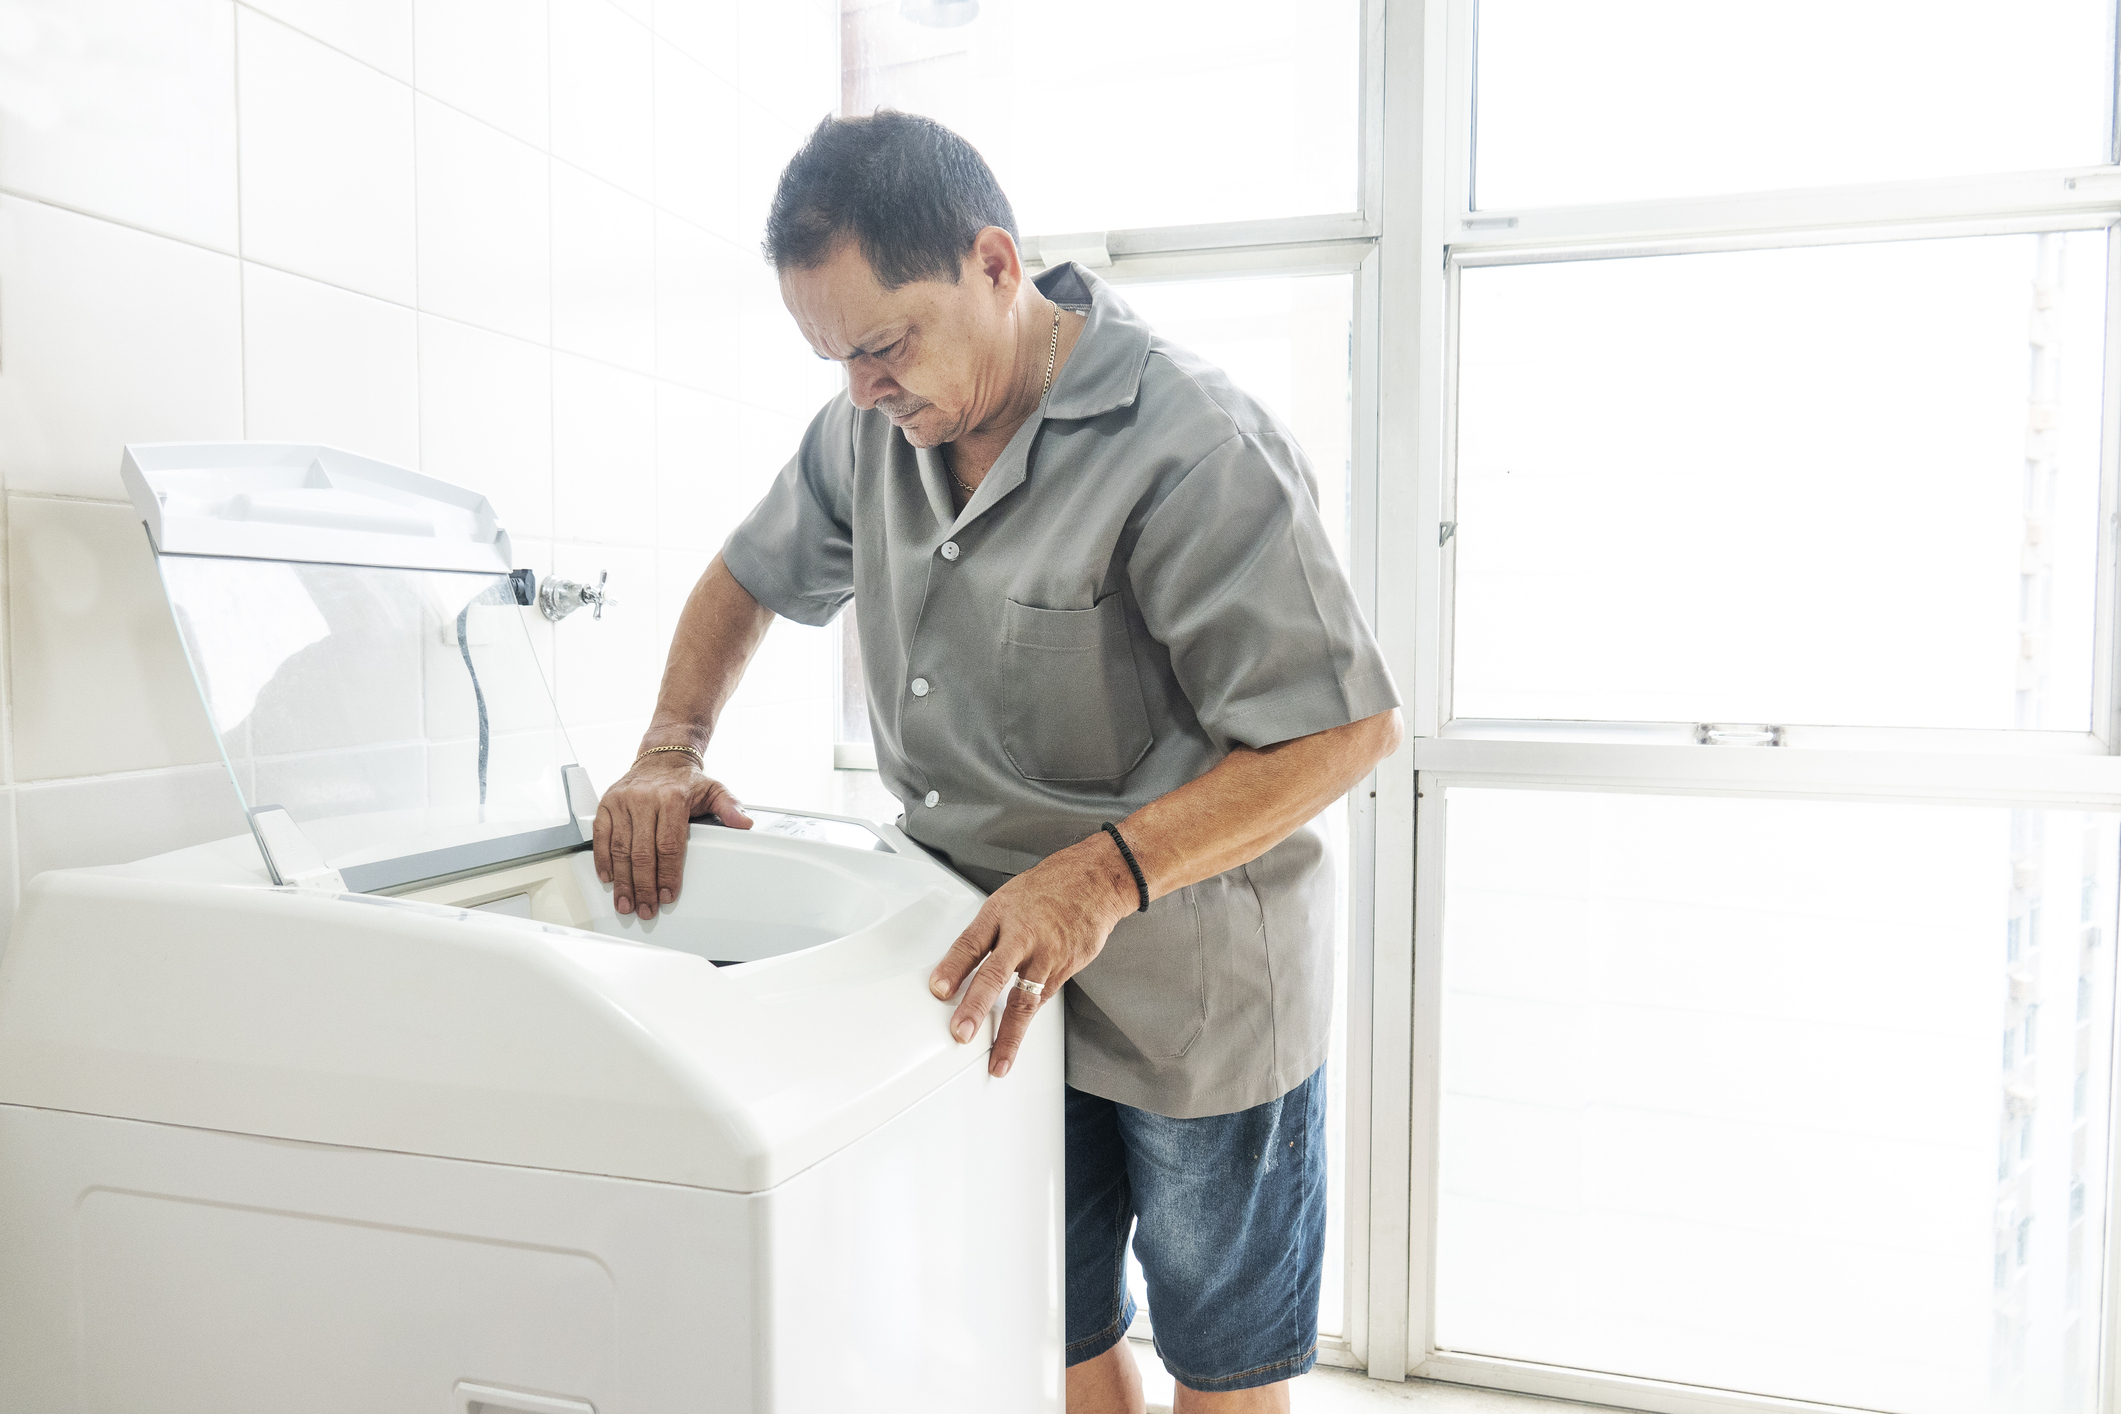 Washer Maintenance: How to Extend the Life of Your Washing Machine